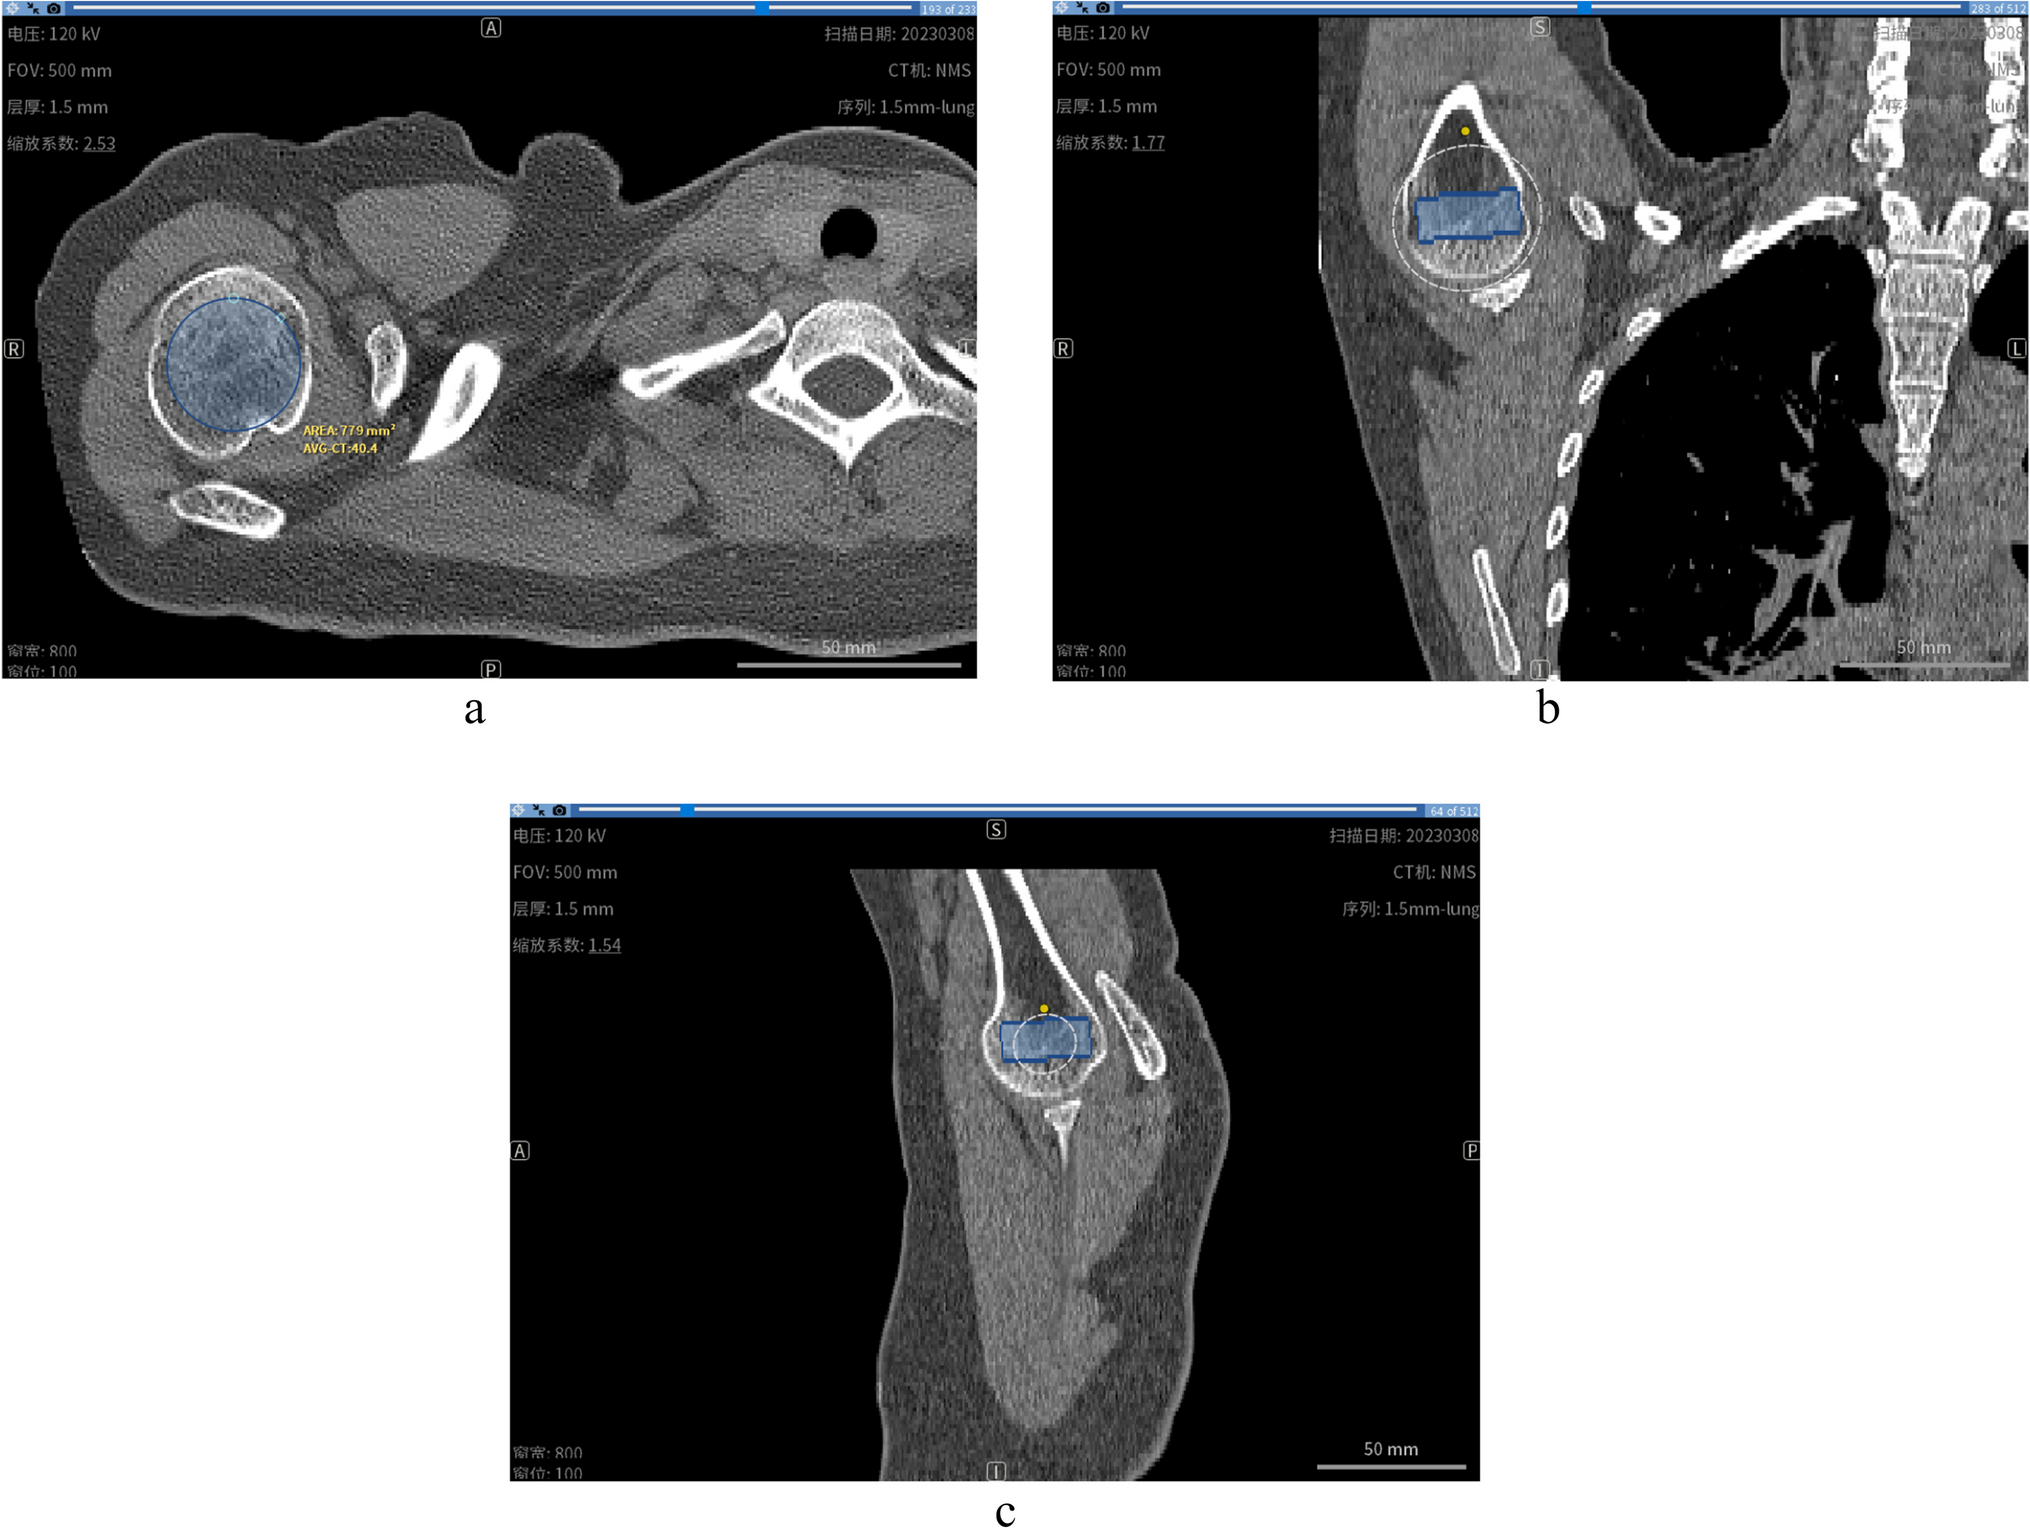 Semi-automatic proximal humeral trabecular bone density assessment tool: technique application and clinical validation